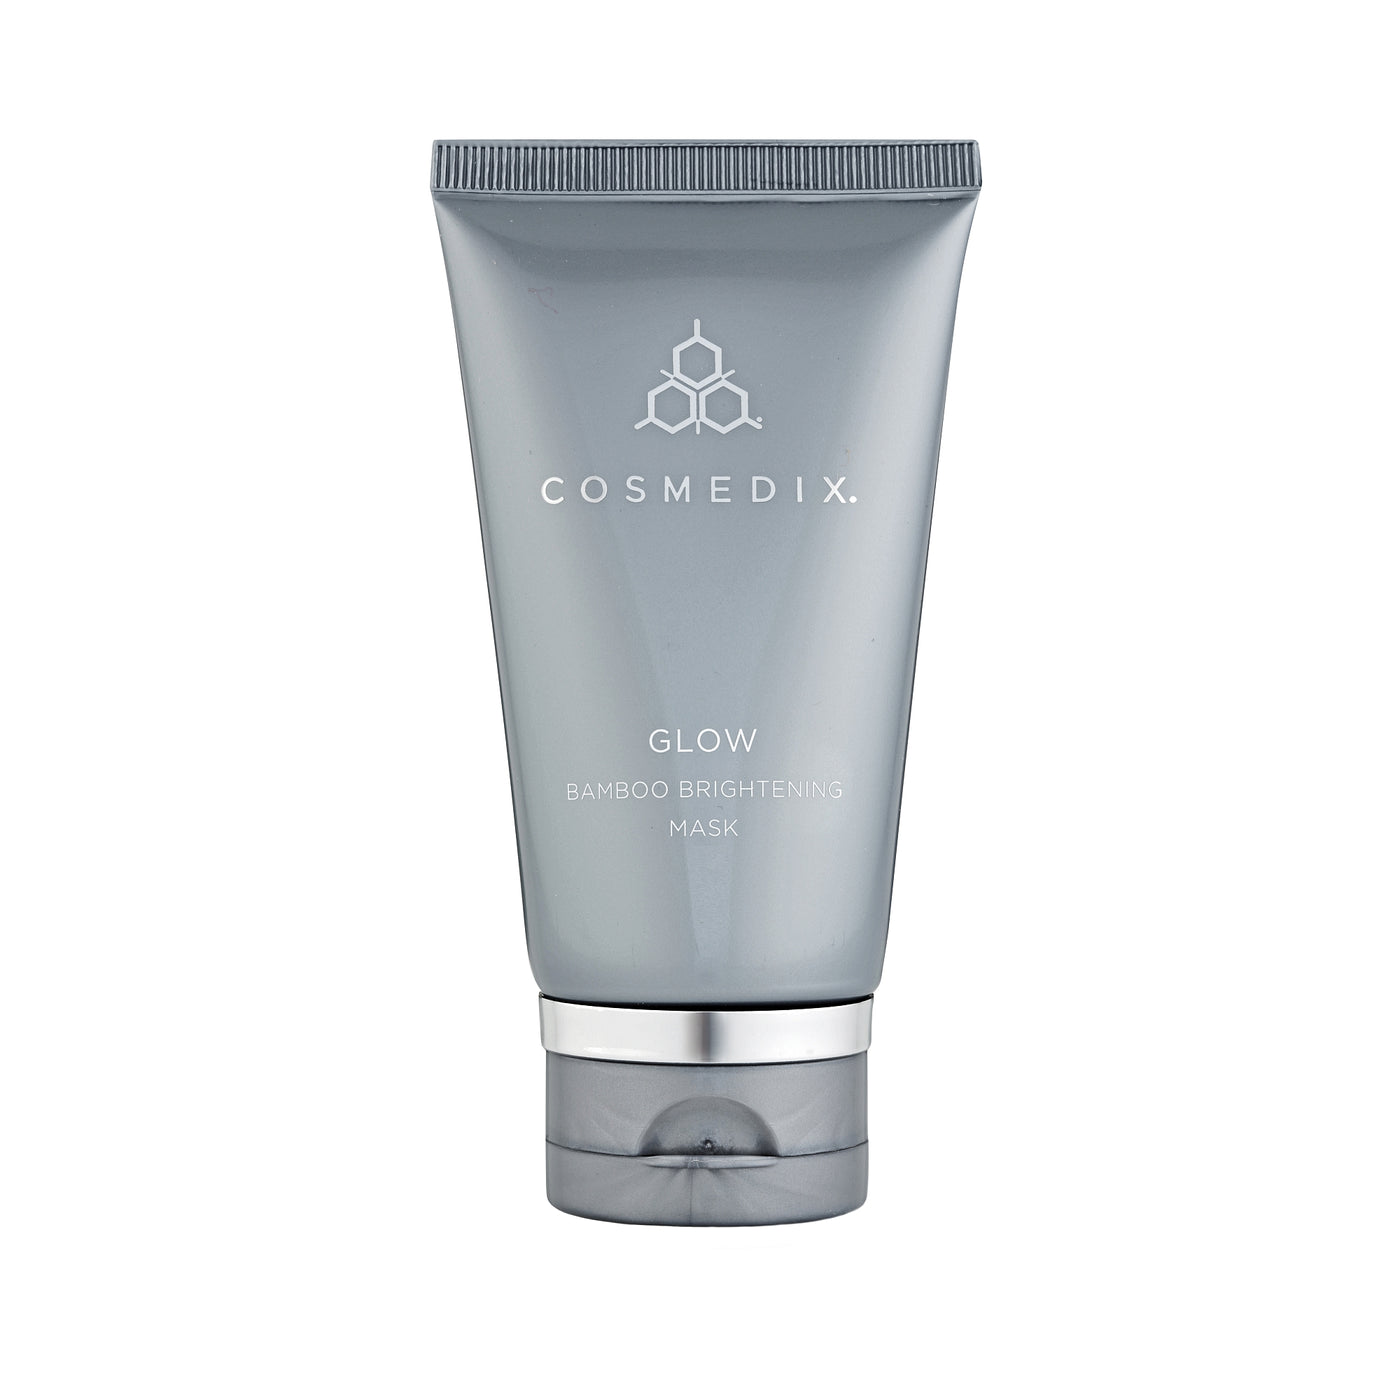 COSMEDIX GLOW MASK 74G - Exquisite Laser Clinic 